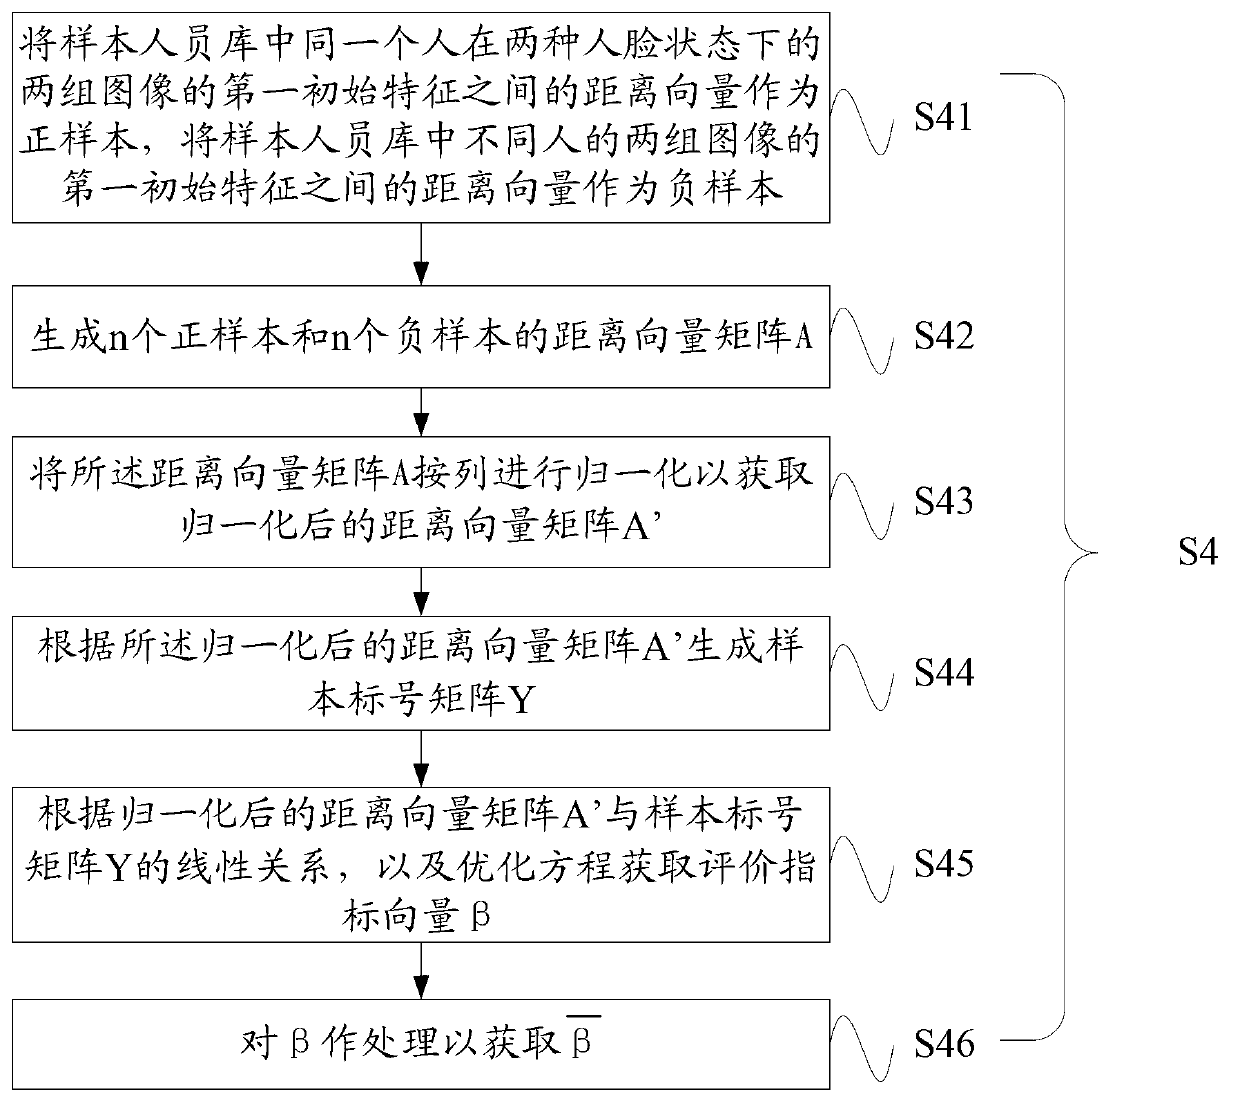 Face recognition method and system fusing visible light and near-infrared information